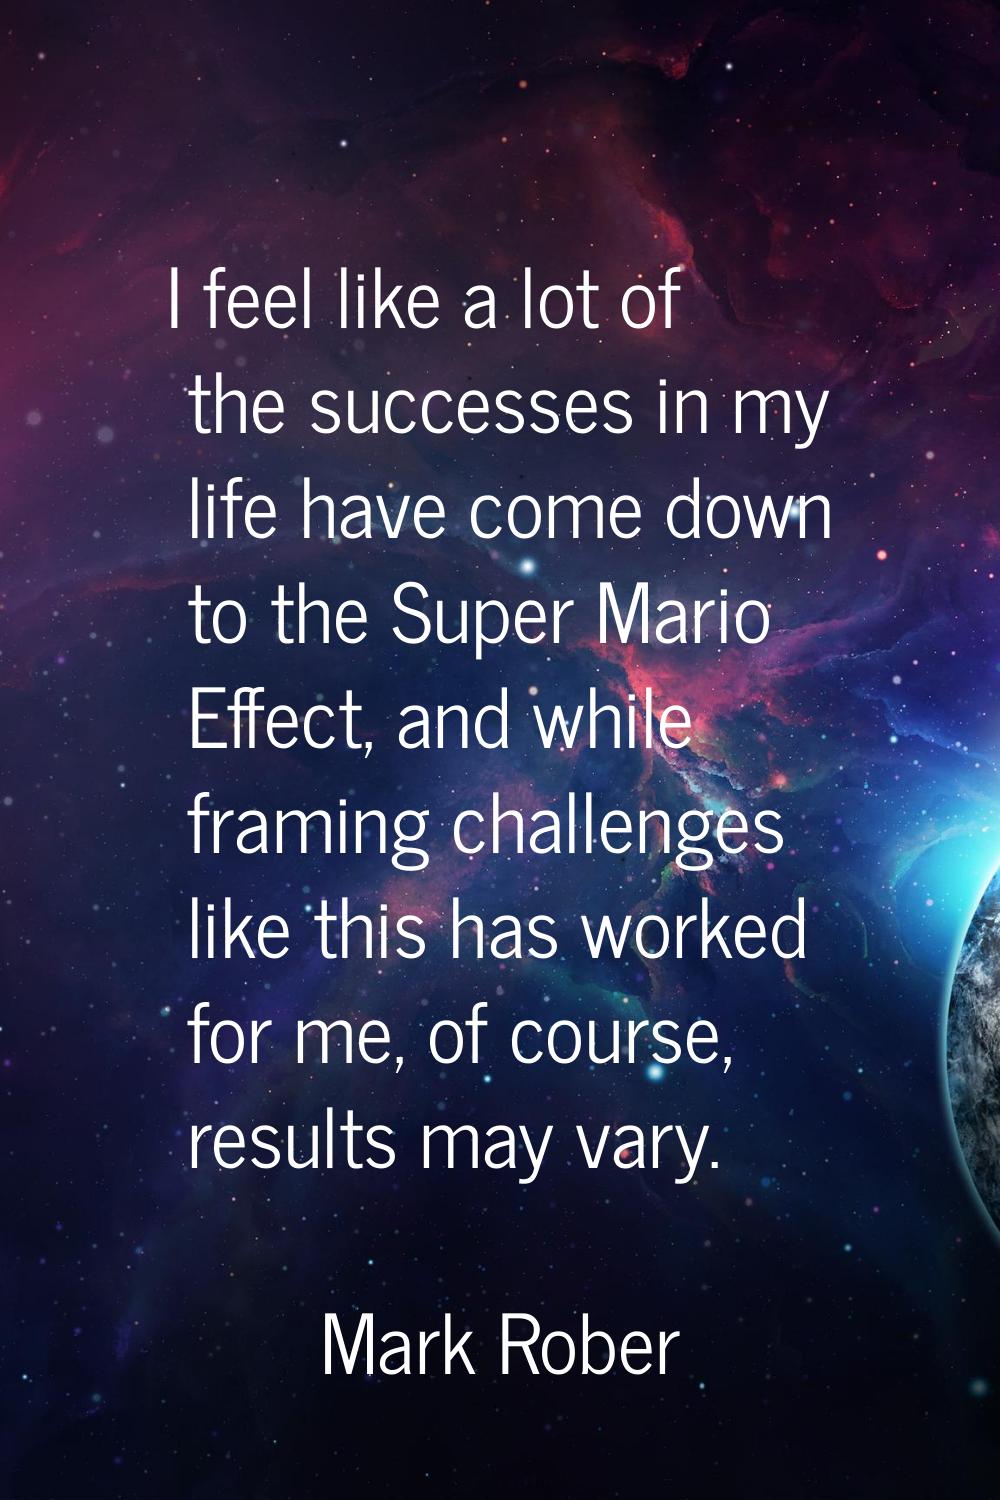 I feel like a lot of the successes in my life have come down to the Super Mario Effect, and while f